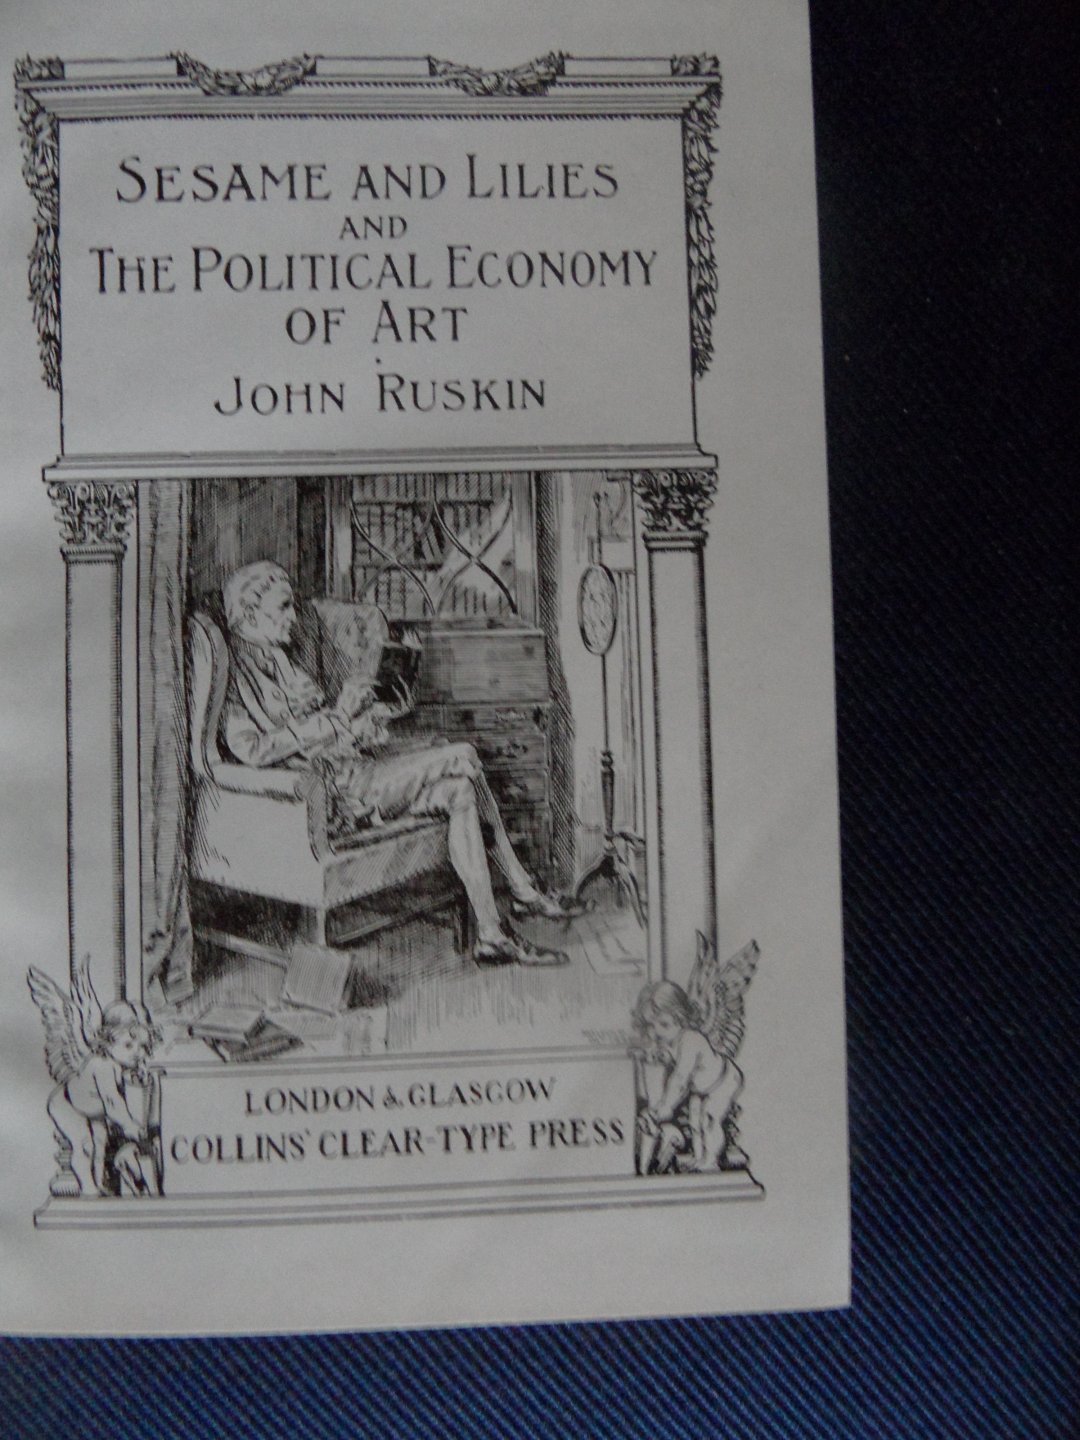 Ruskin, John - Sesame and lilies and The political economy of art